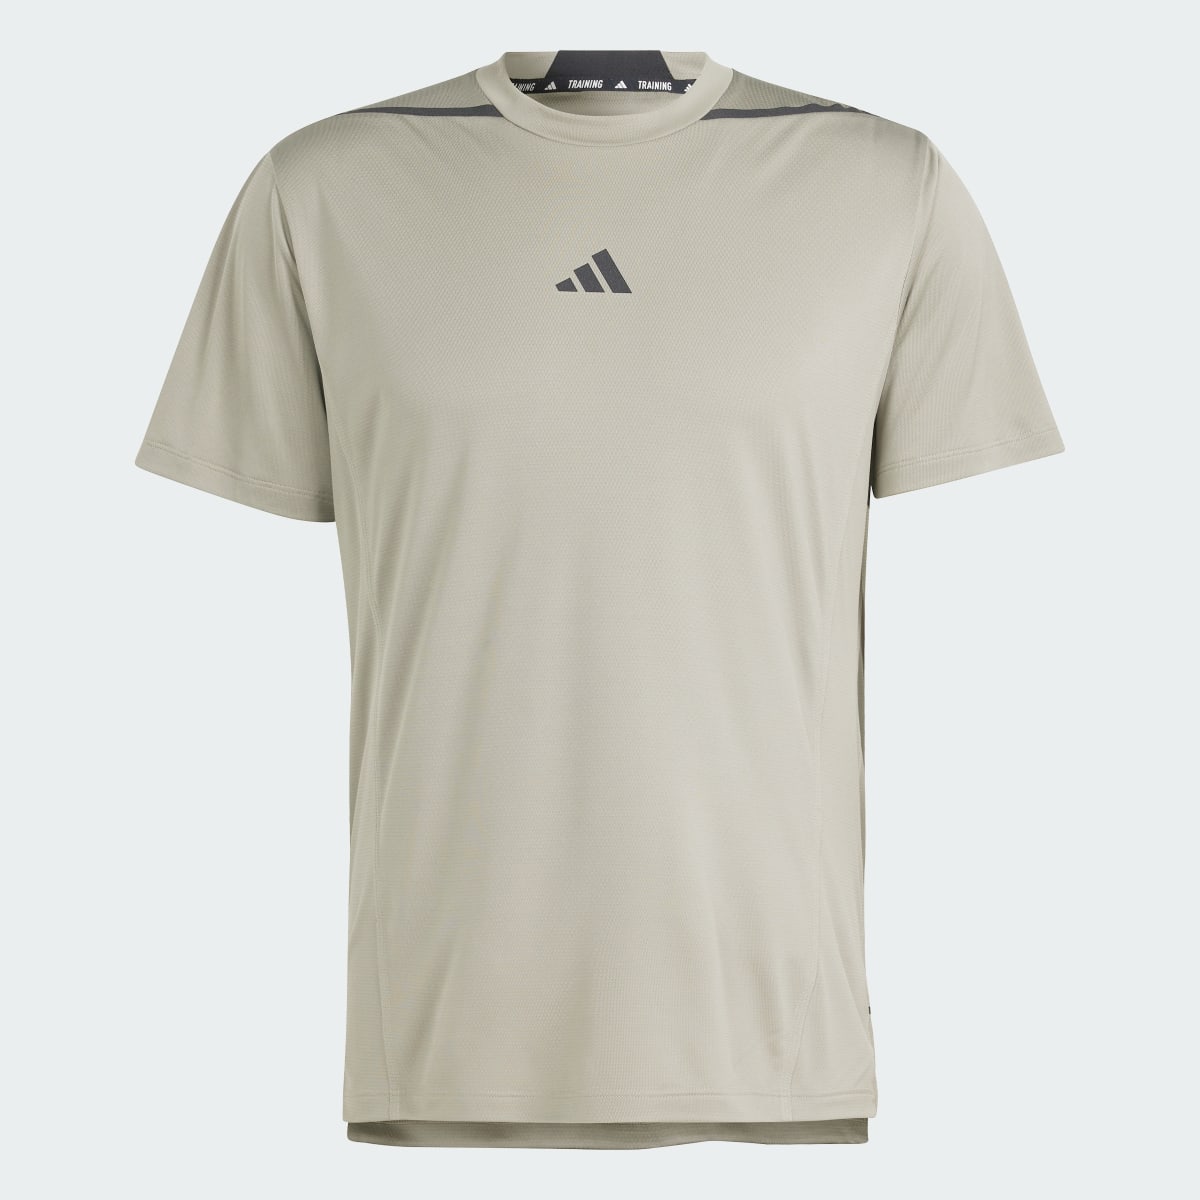 Adidas T-shirt Designed for Training adistrong Workout. 5